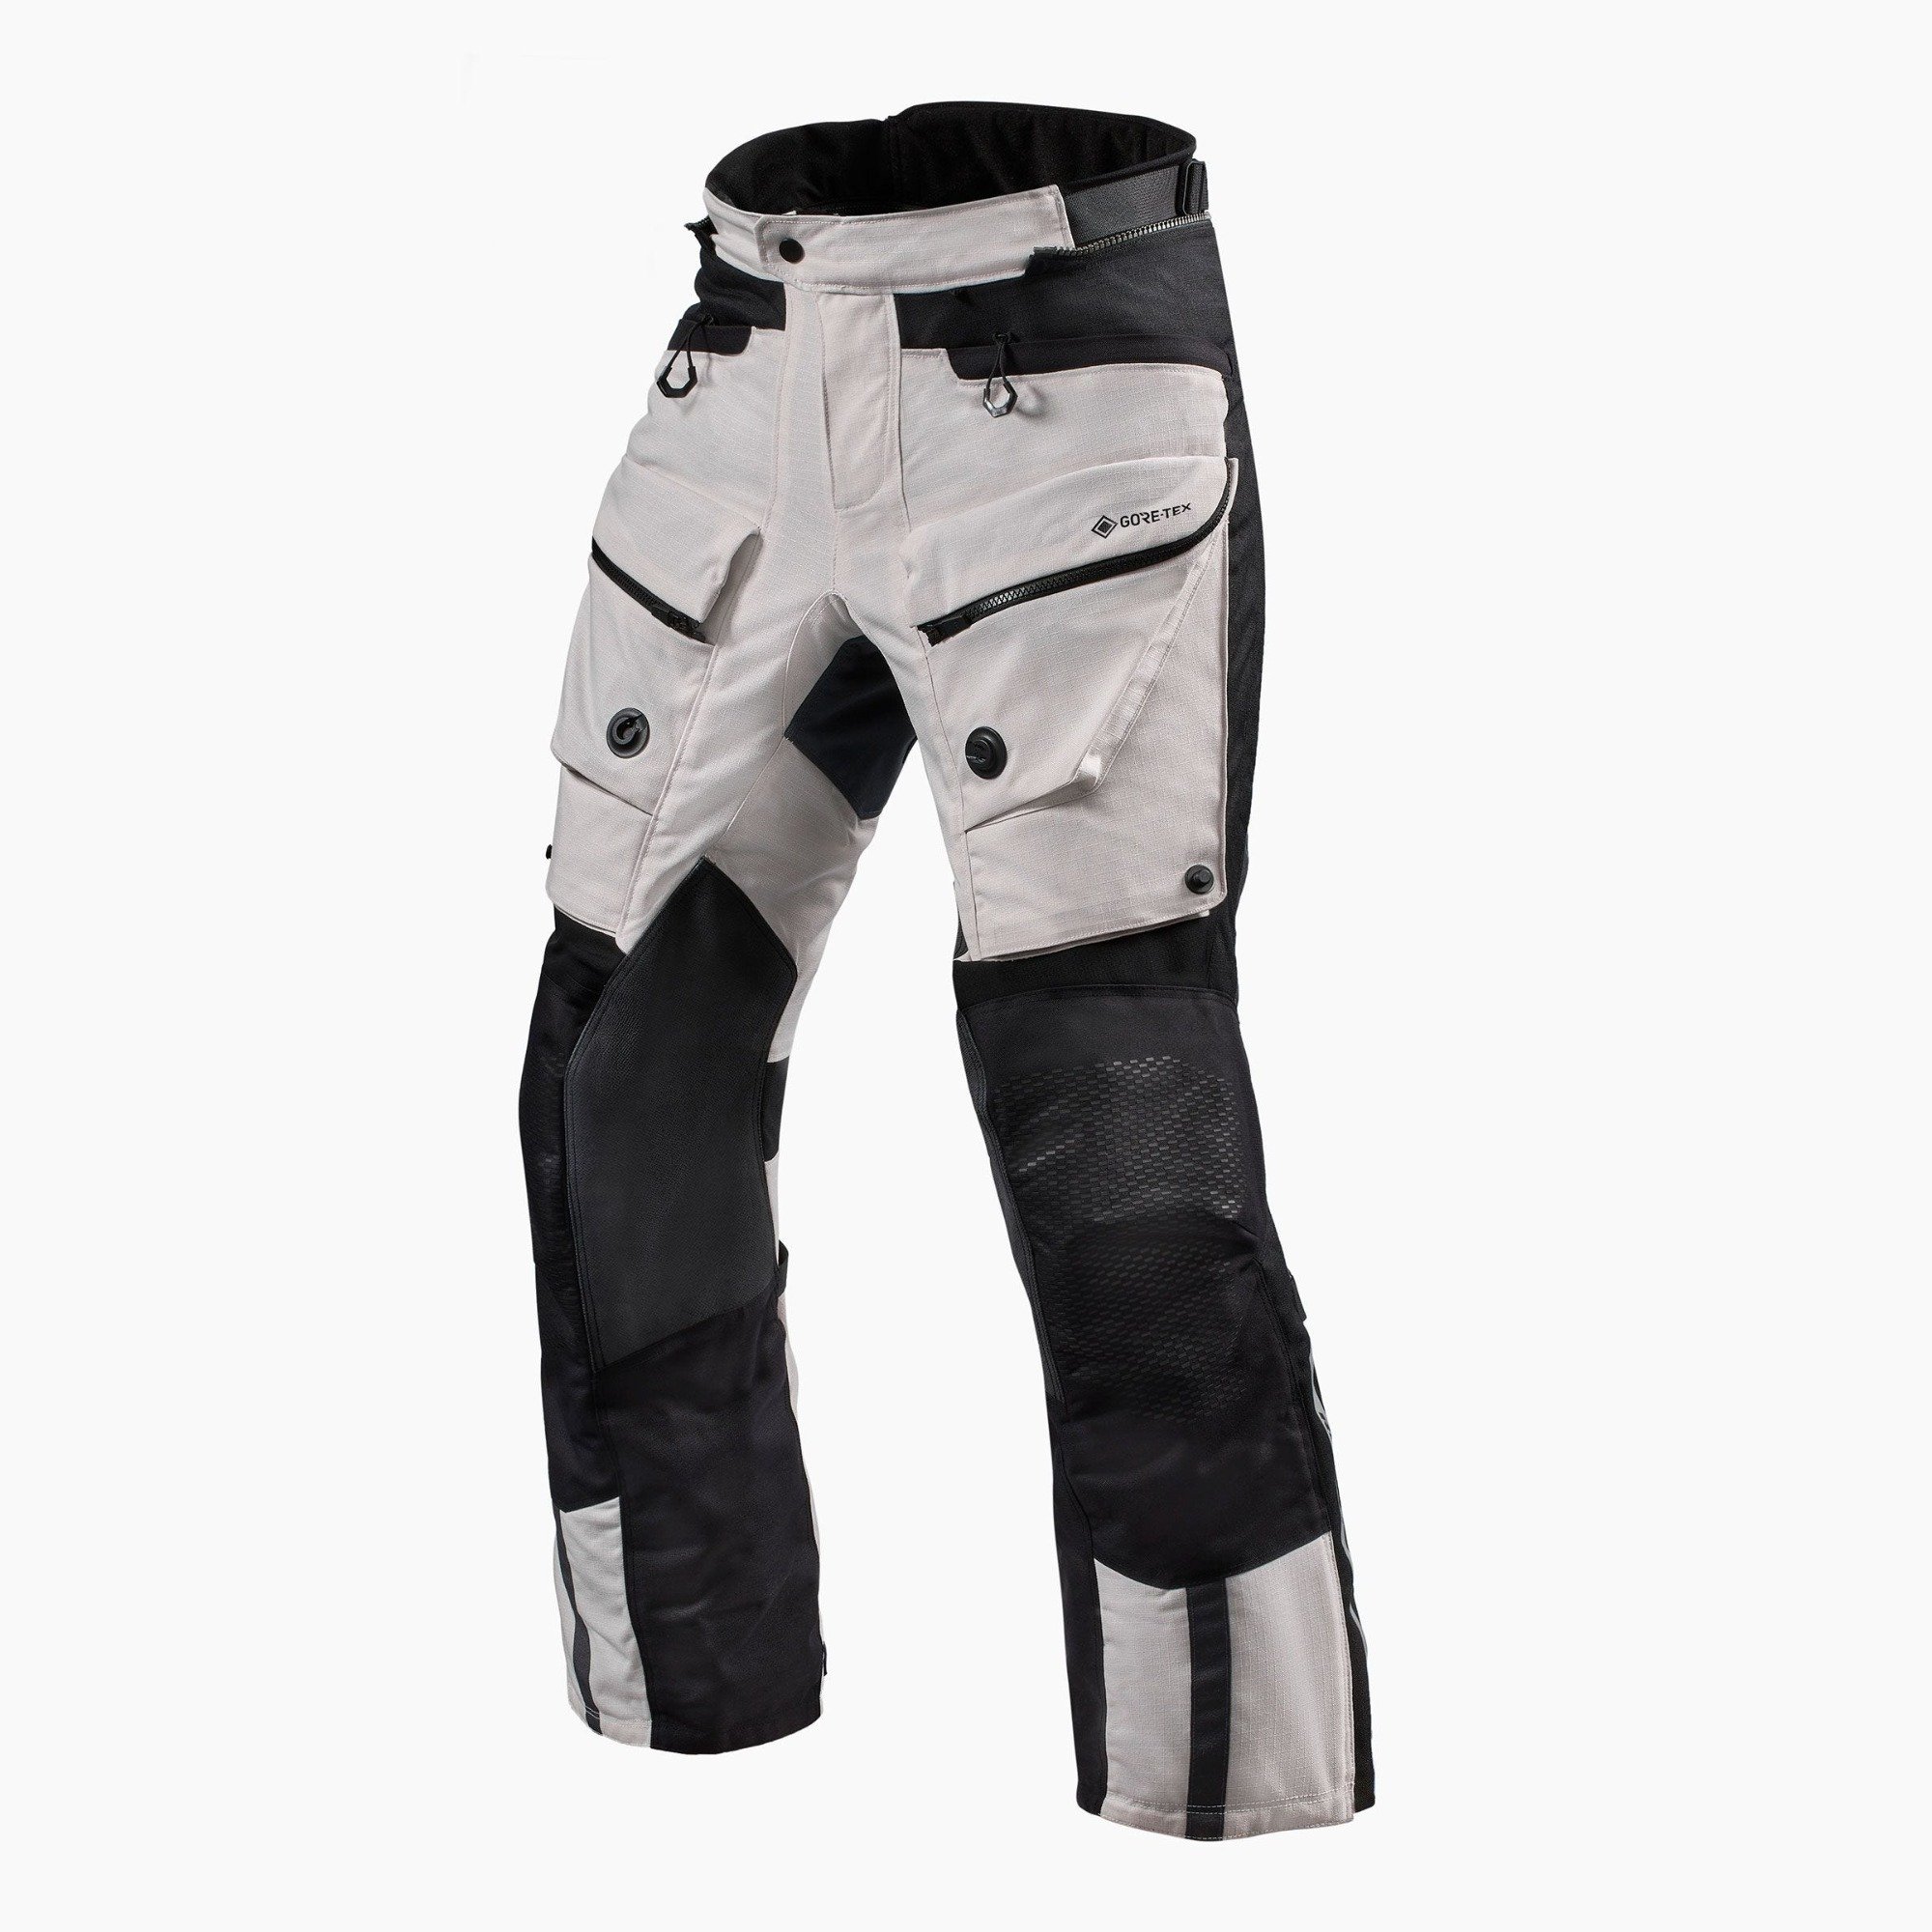 Image of REV'IT! Trousers Defender 3 GTX Silver Black Standard Motorcycle Pants Size XL ID 8700001319966